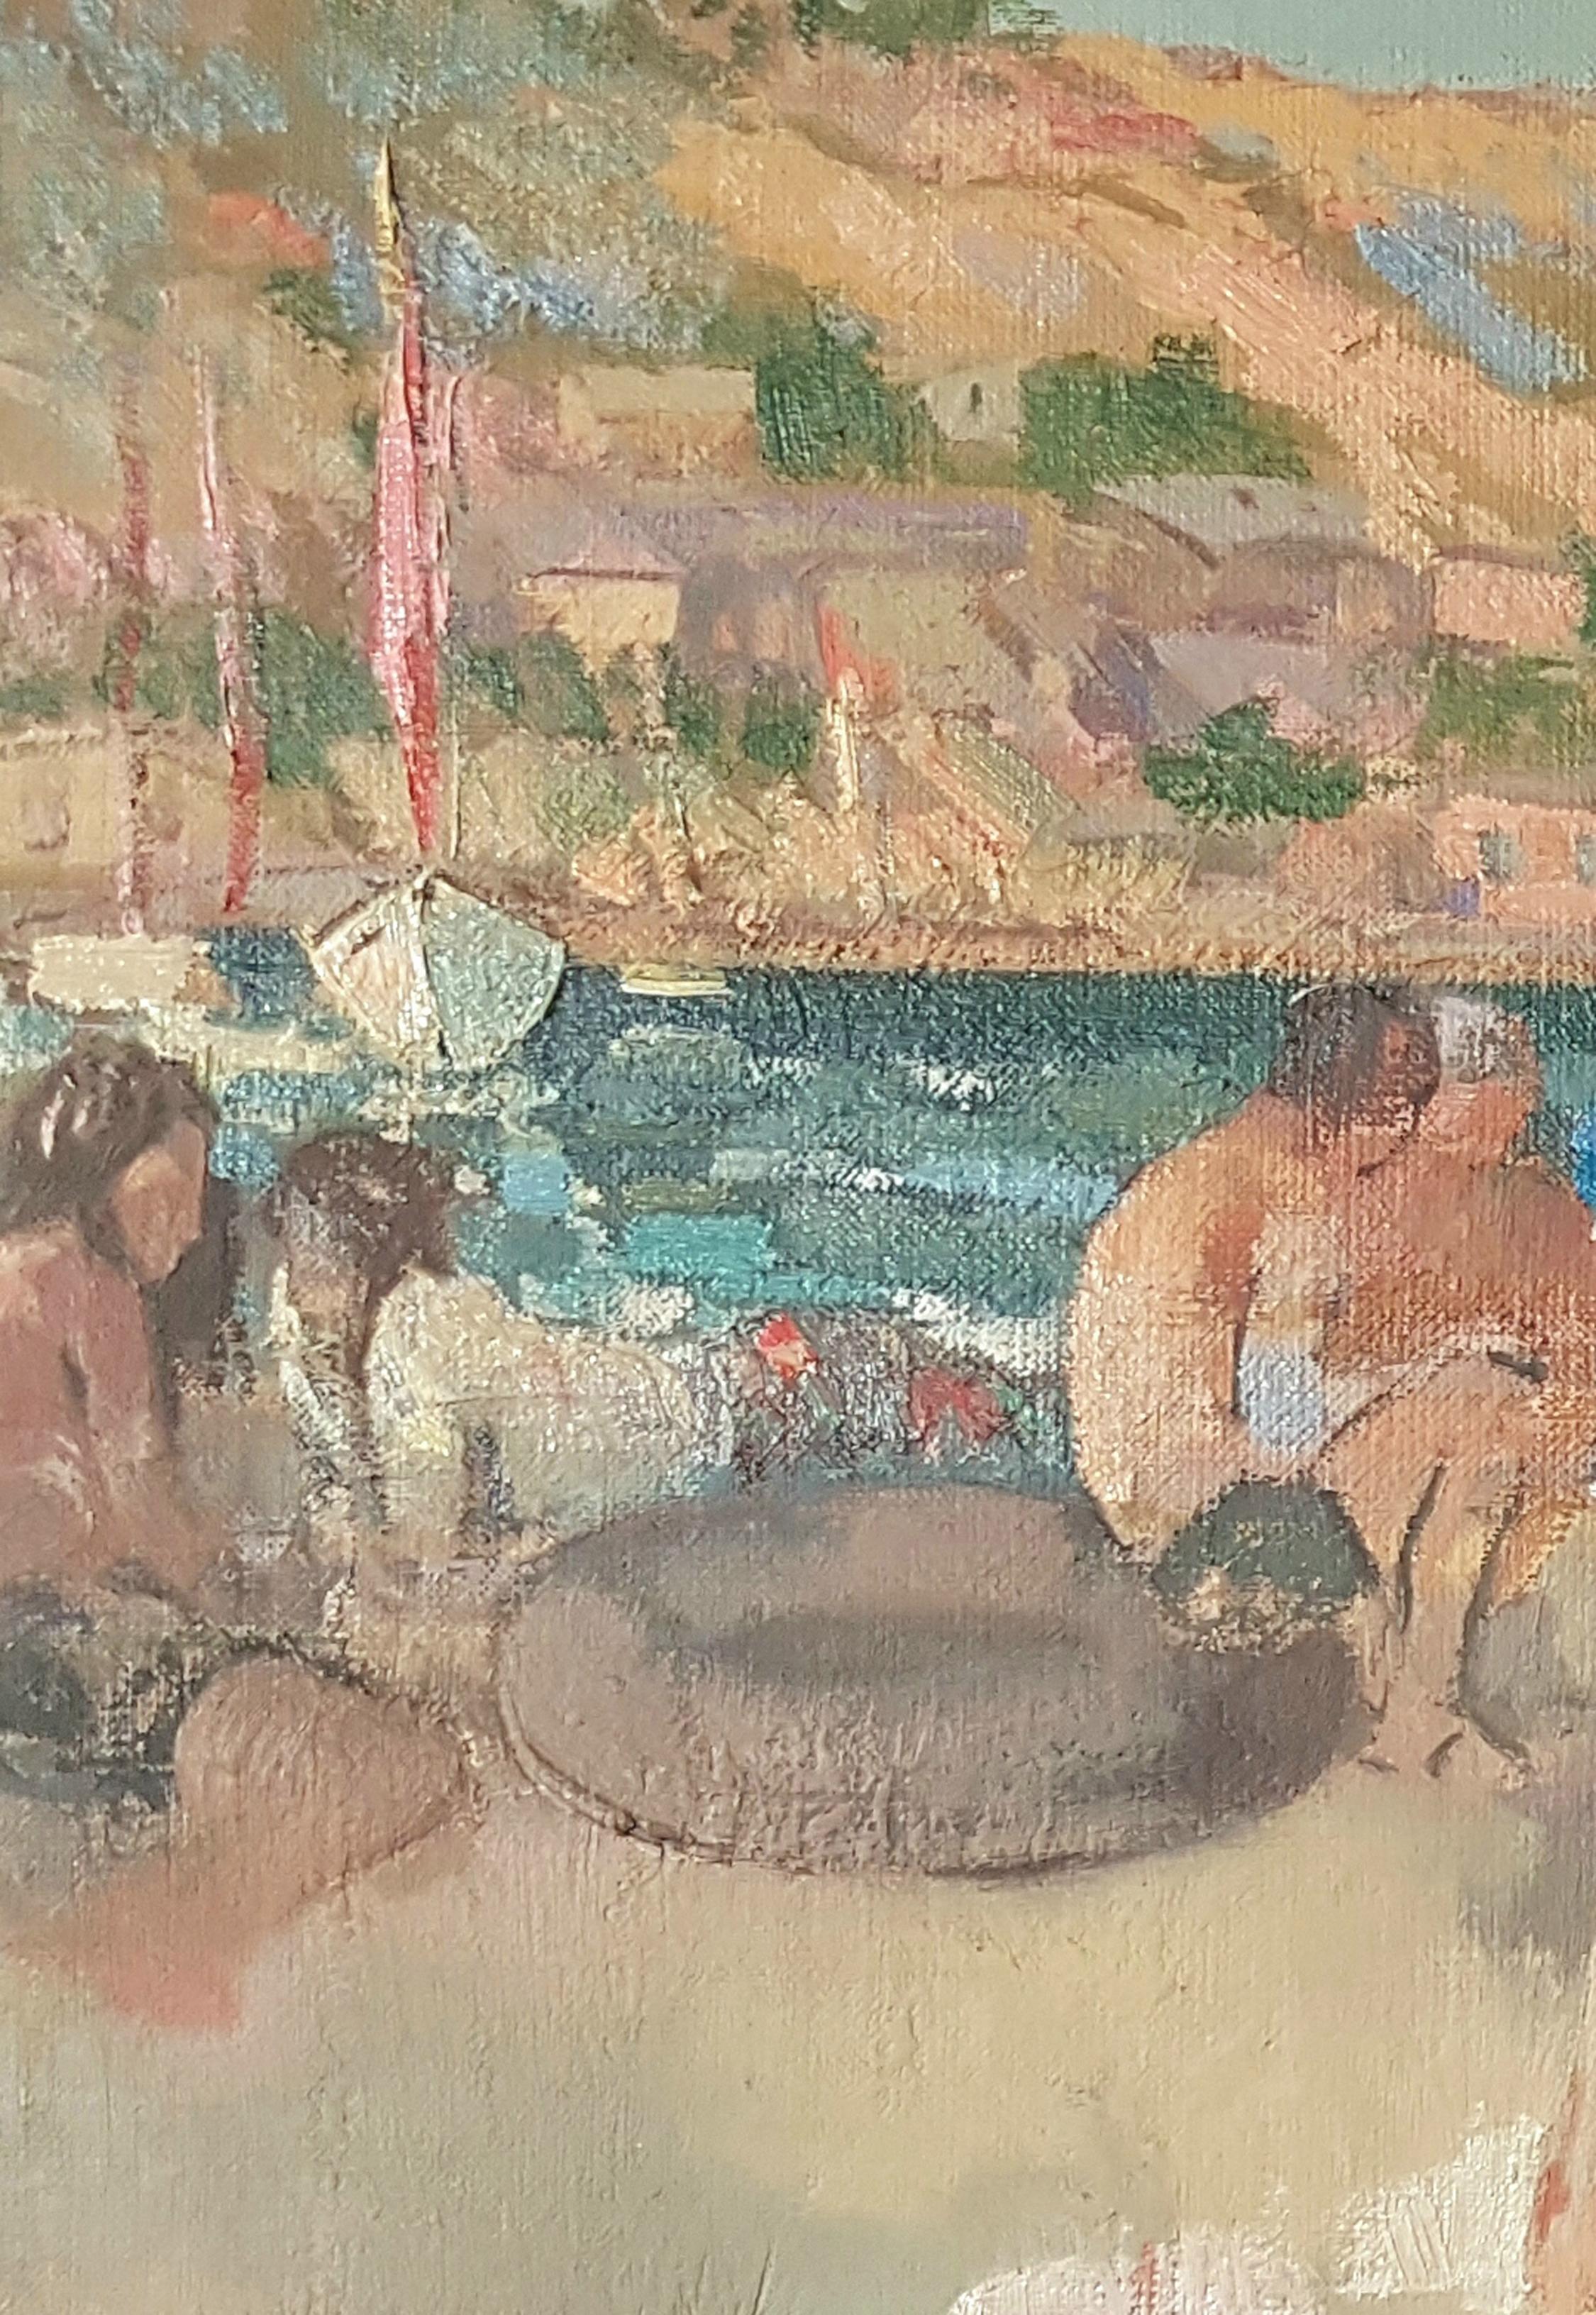 Artist: Ara H. Hakobyan
Work: Original Oil Painting, Handmade Artwork, One of a Kind
Medium: Oil on Canvas
Year: 2016
Style: Impressionism
Title: Playing with Sand
Size: 22